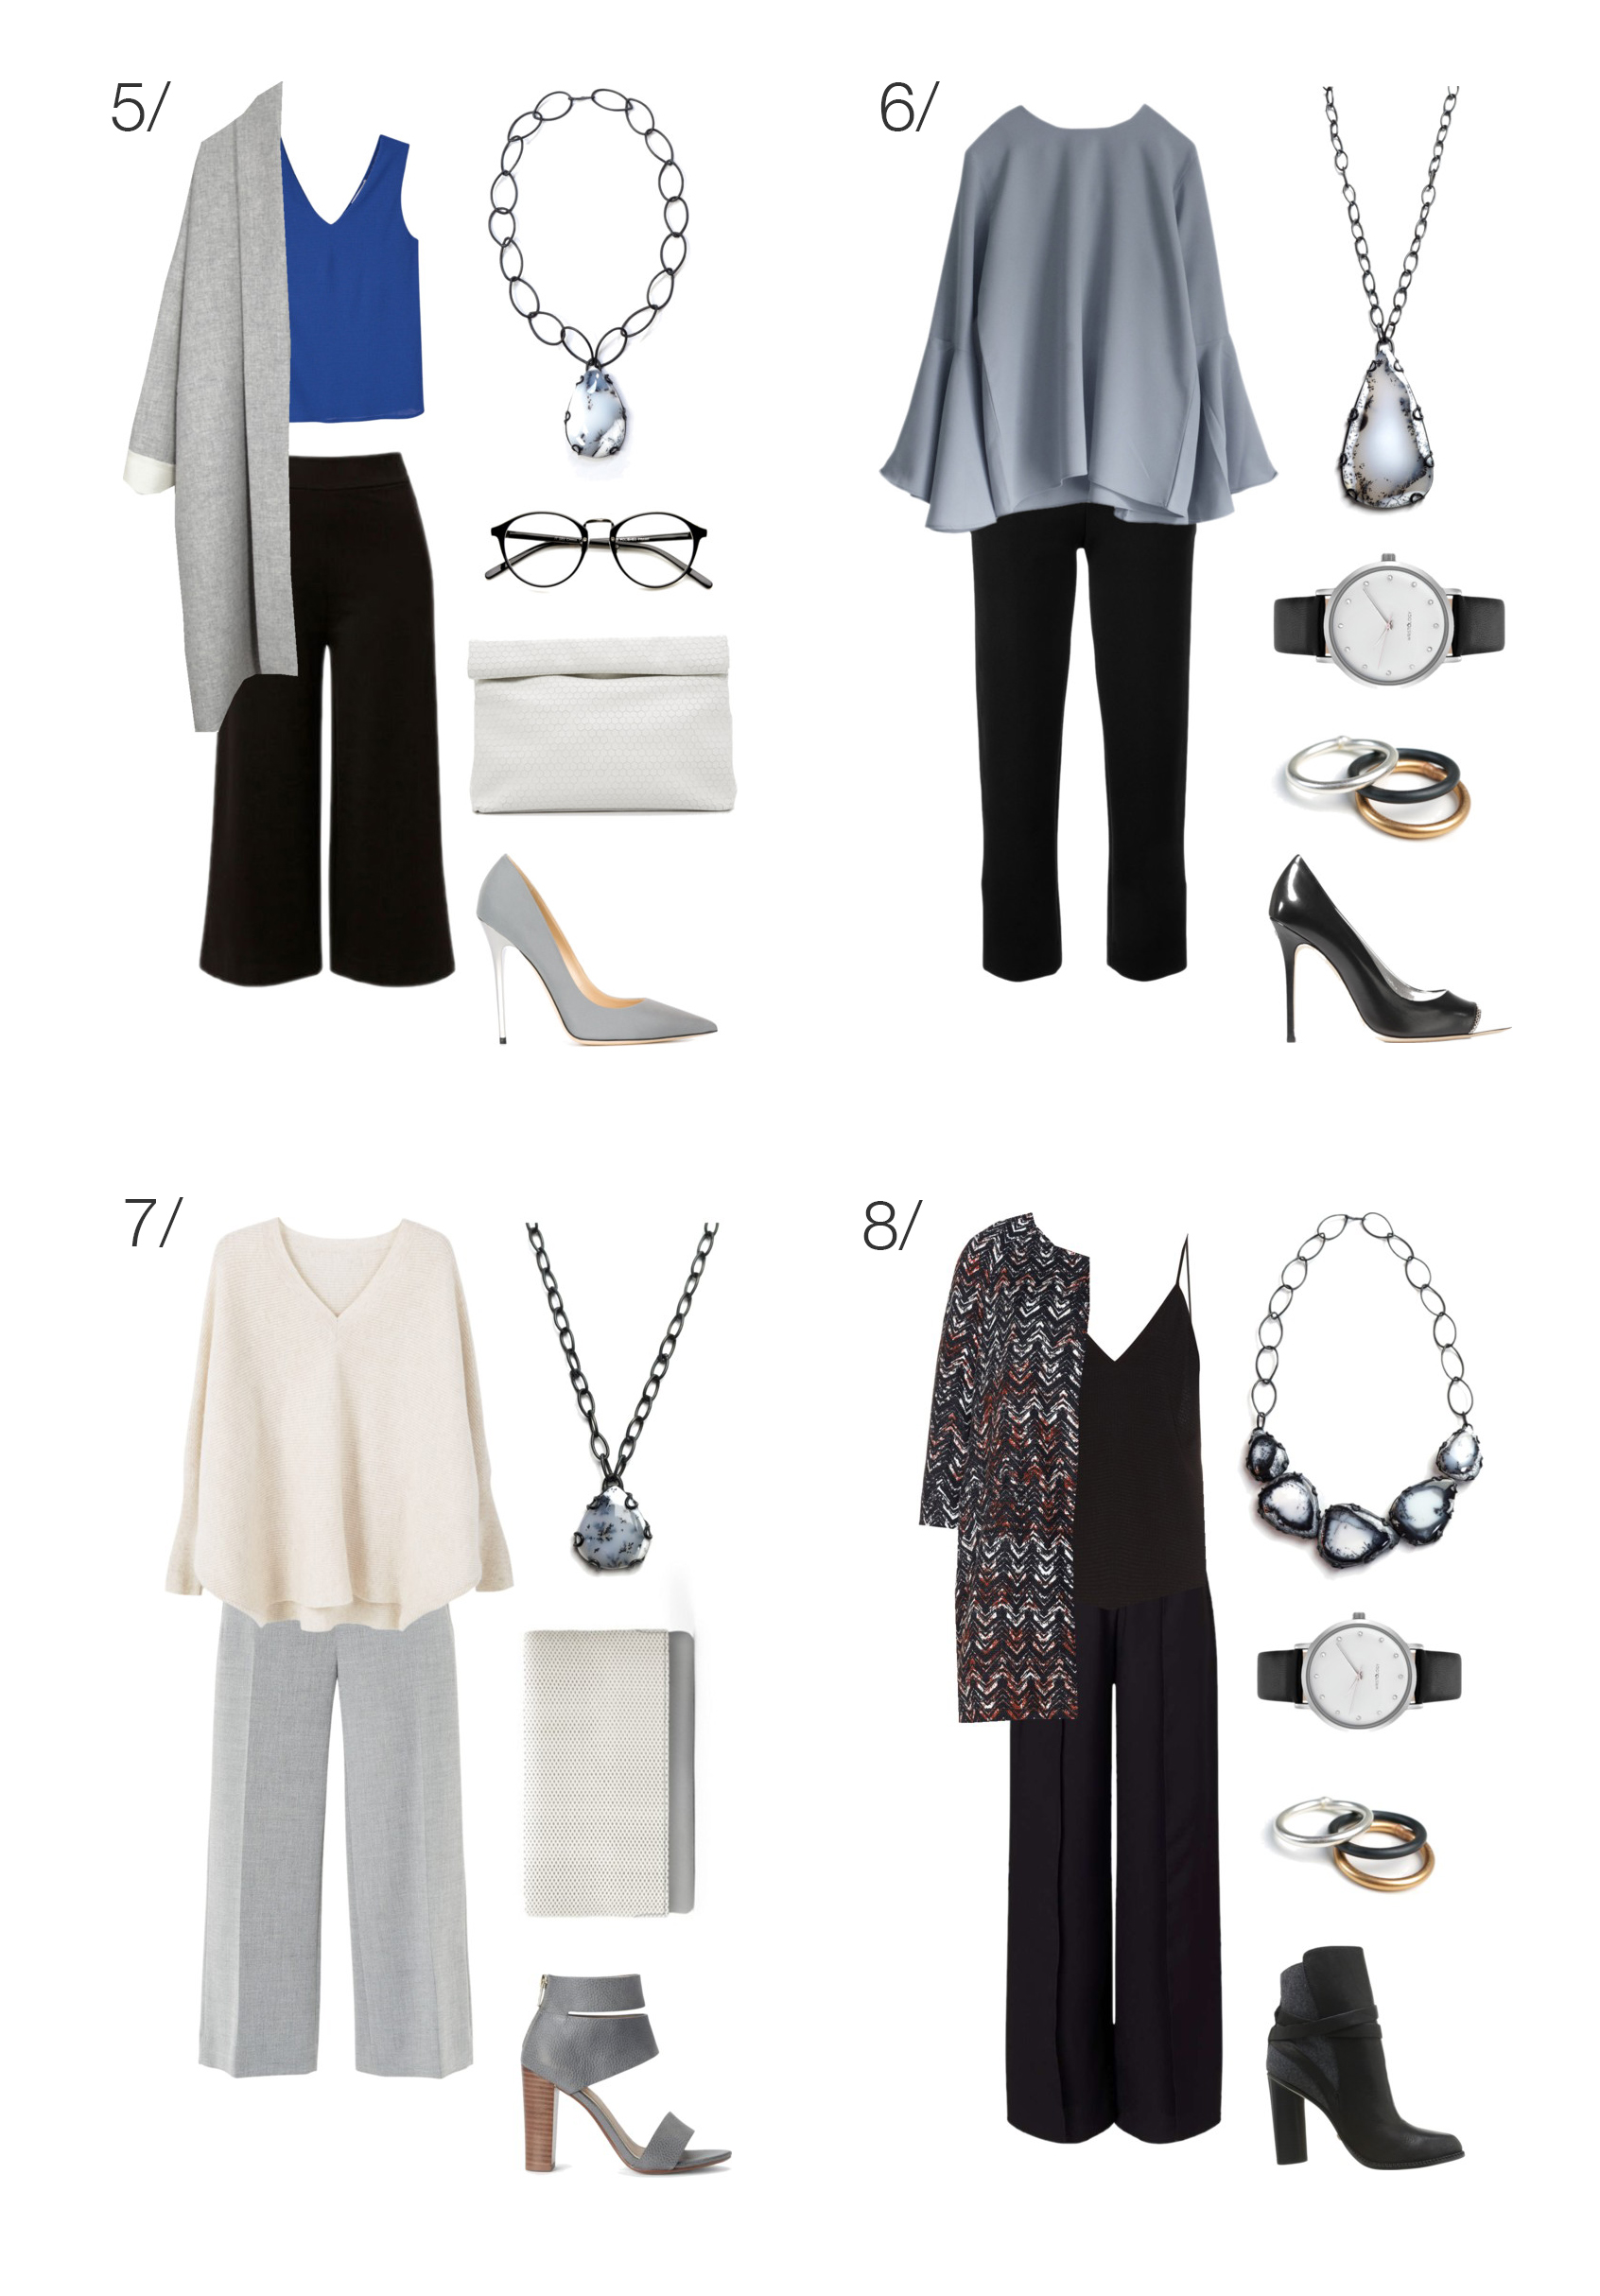 5 Simple Outfits That Will Make Anyone Look Chic And Elegant —  AlwaysMoodyBlogs